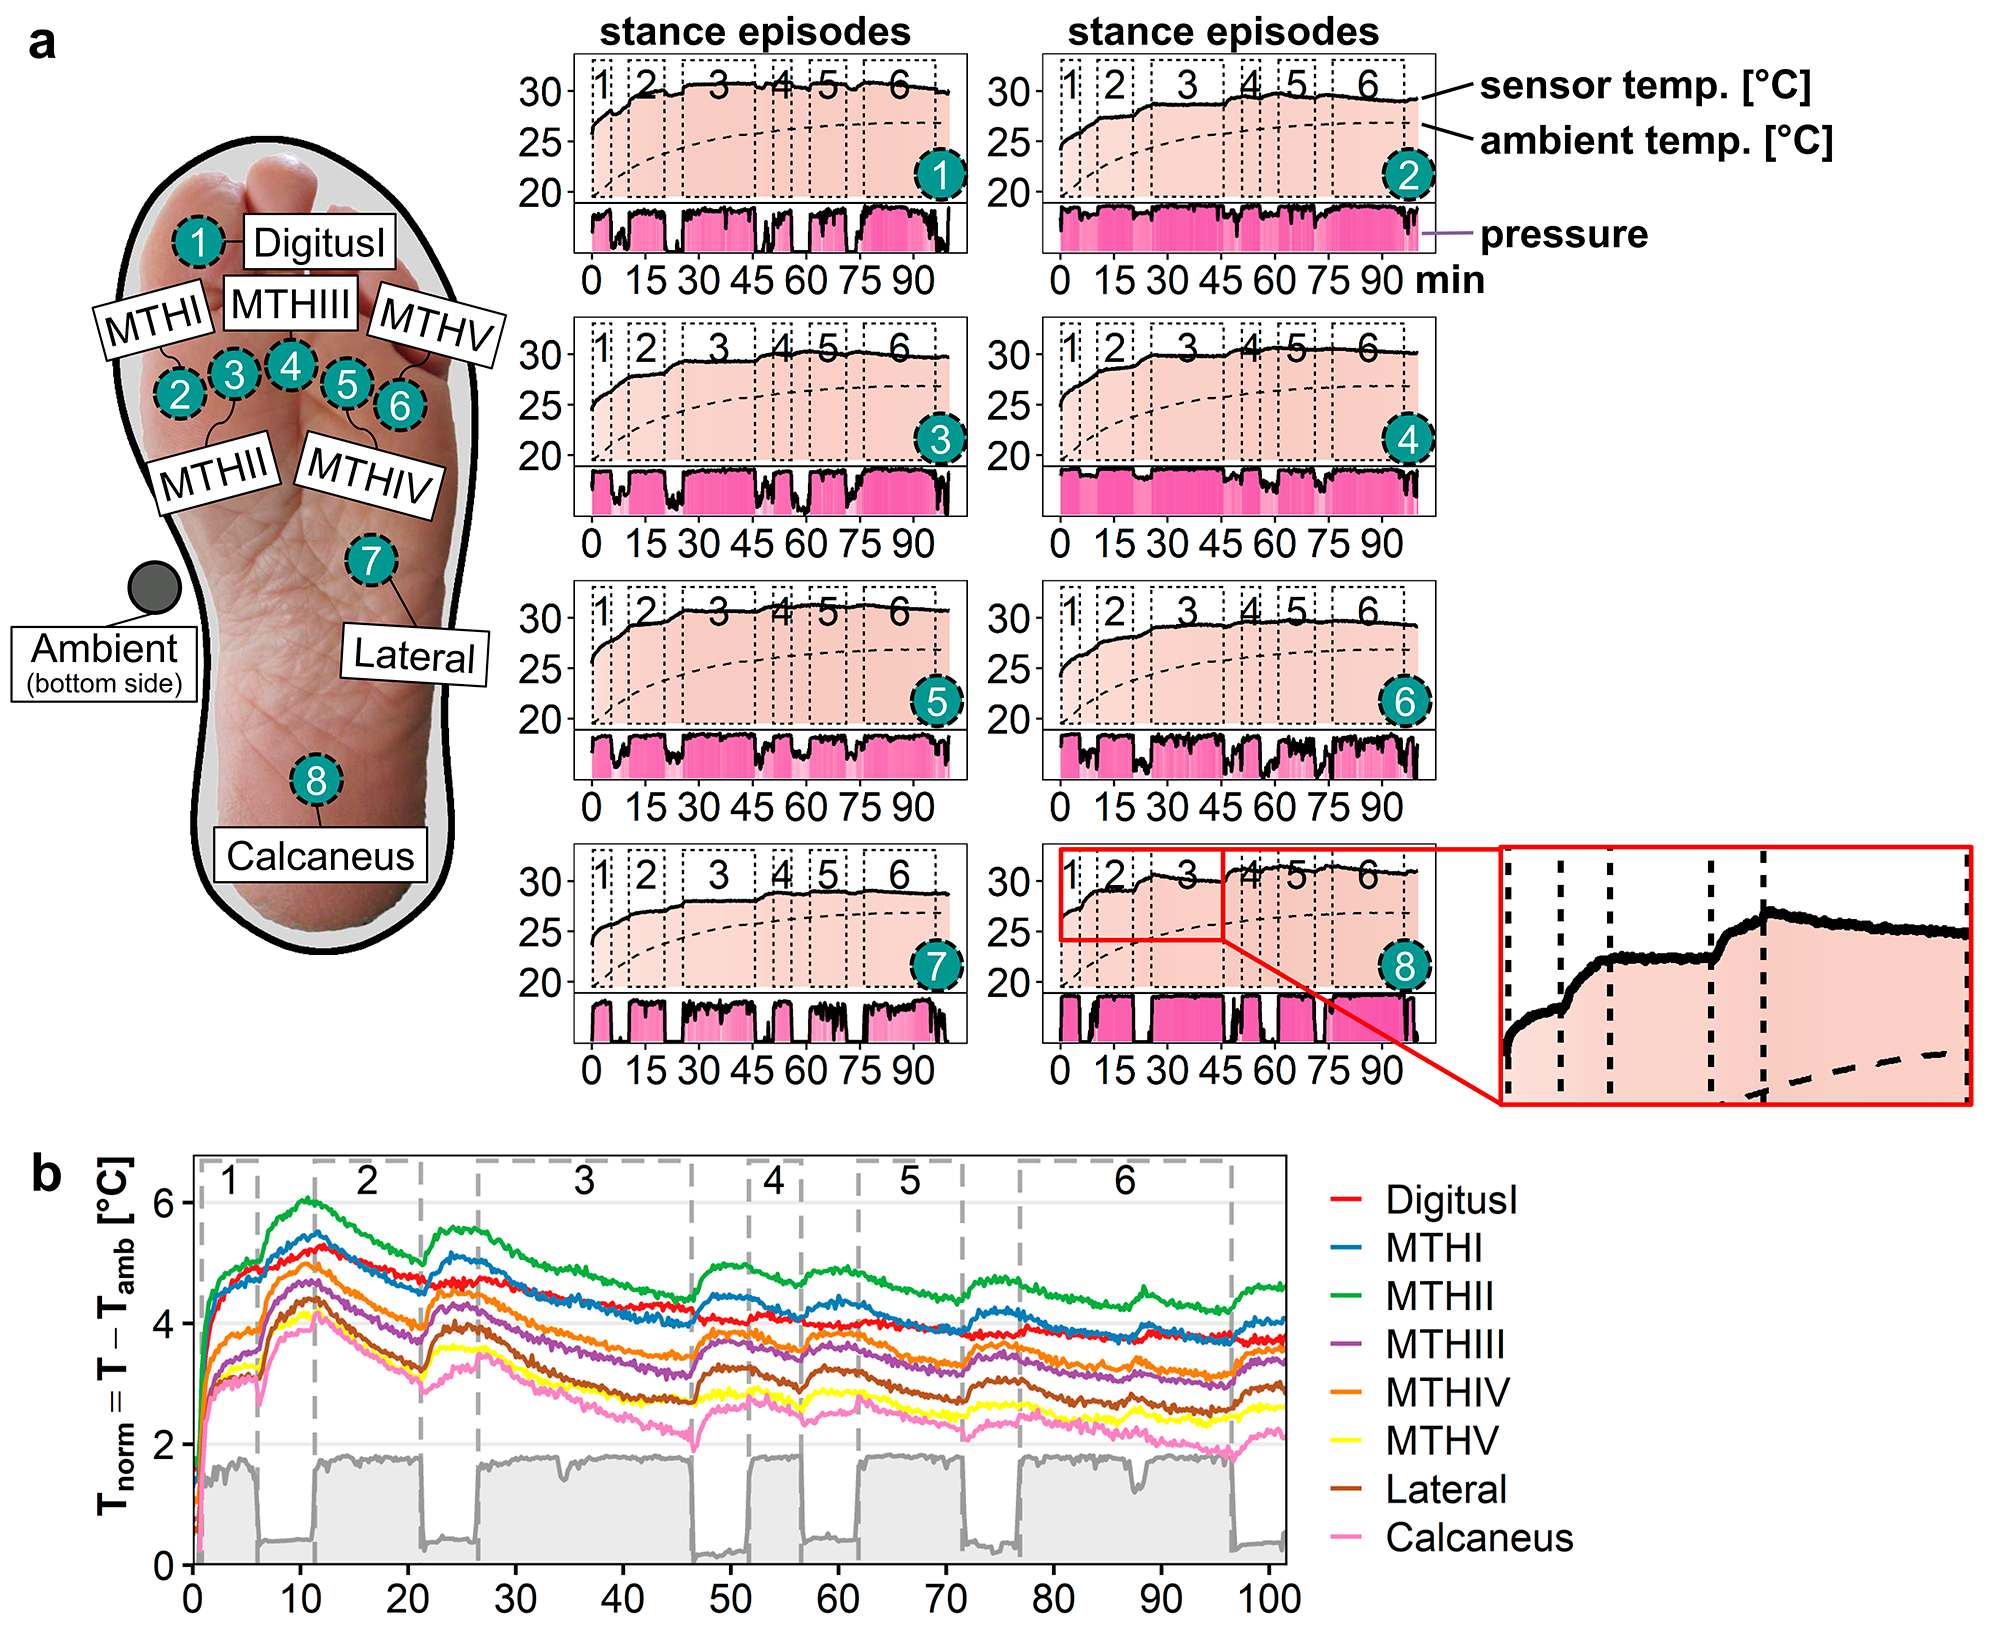 Compound figure illustrating temperature changes recorded by sensor-equipped insole for an example subject during the study experiment. 